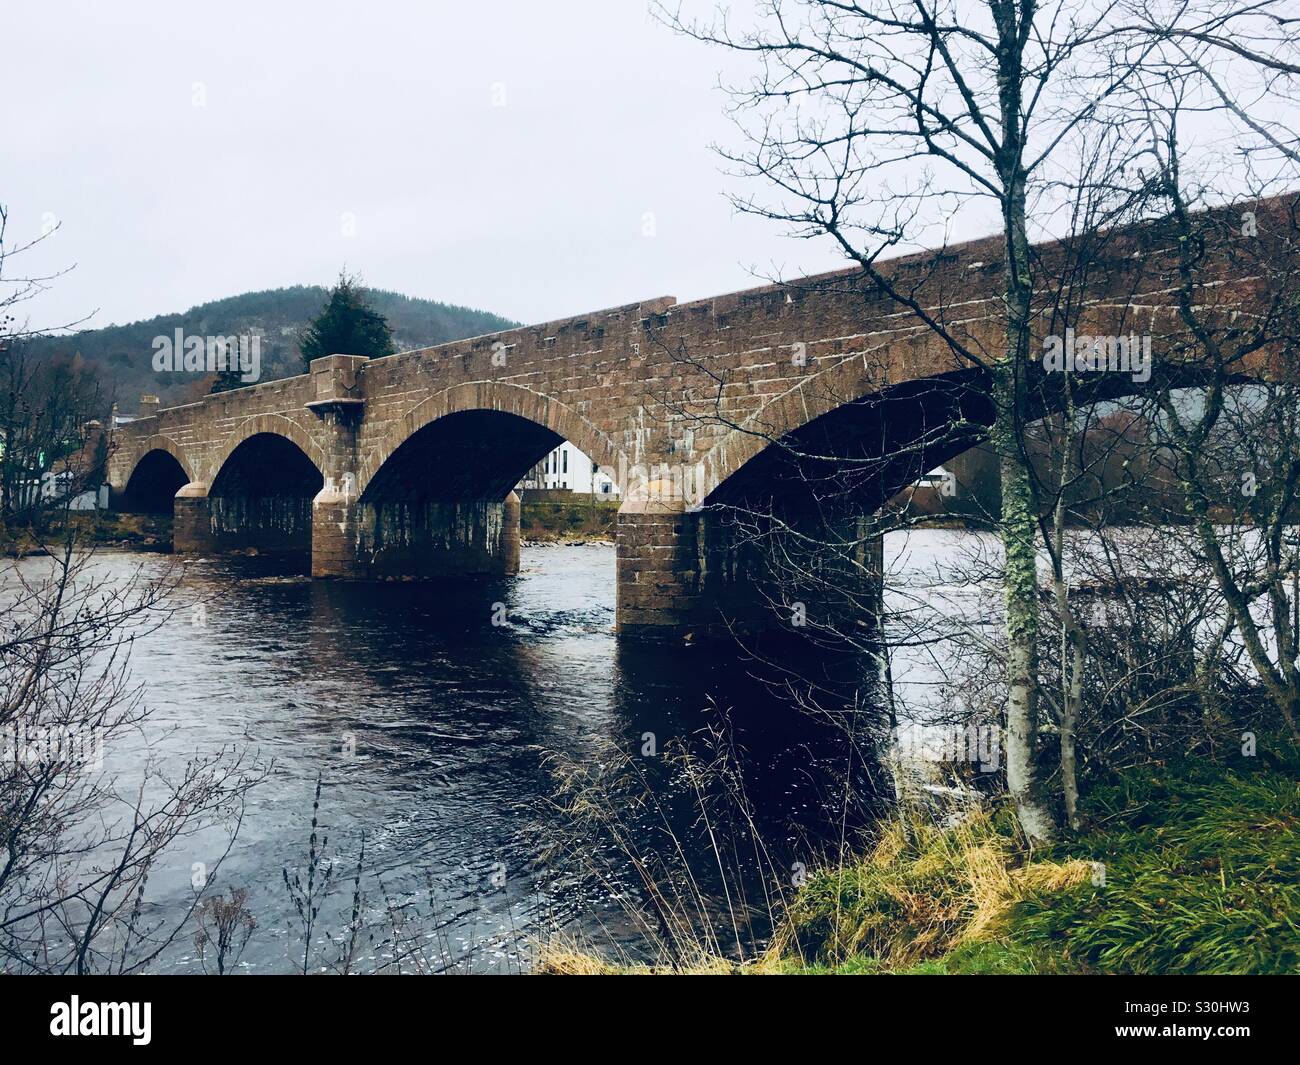 Royal Bridge, Ballater over the River Dee. Also known as Ballater Bridge or Queen's Bridge. The bridge was opened in 1885 by Queen Victoria. Stock Photo